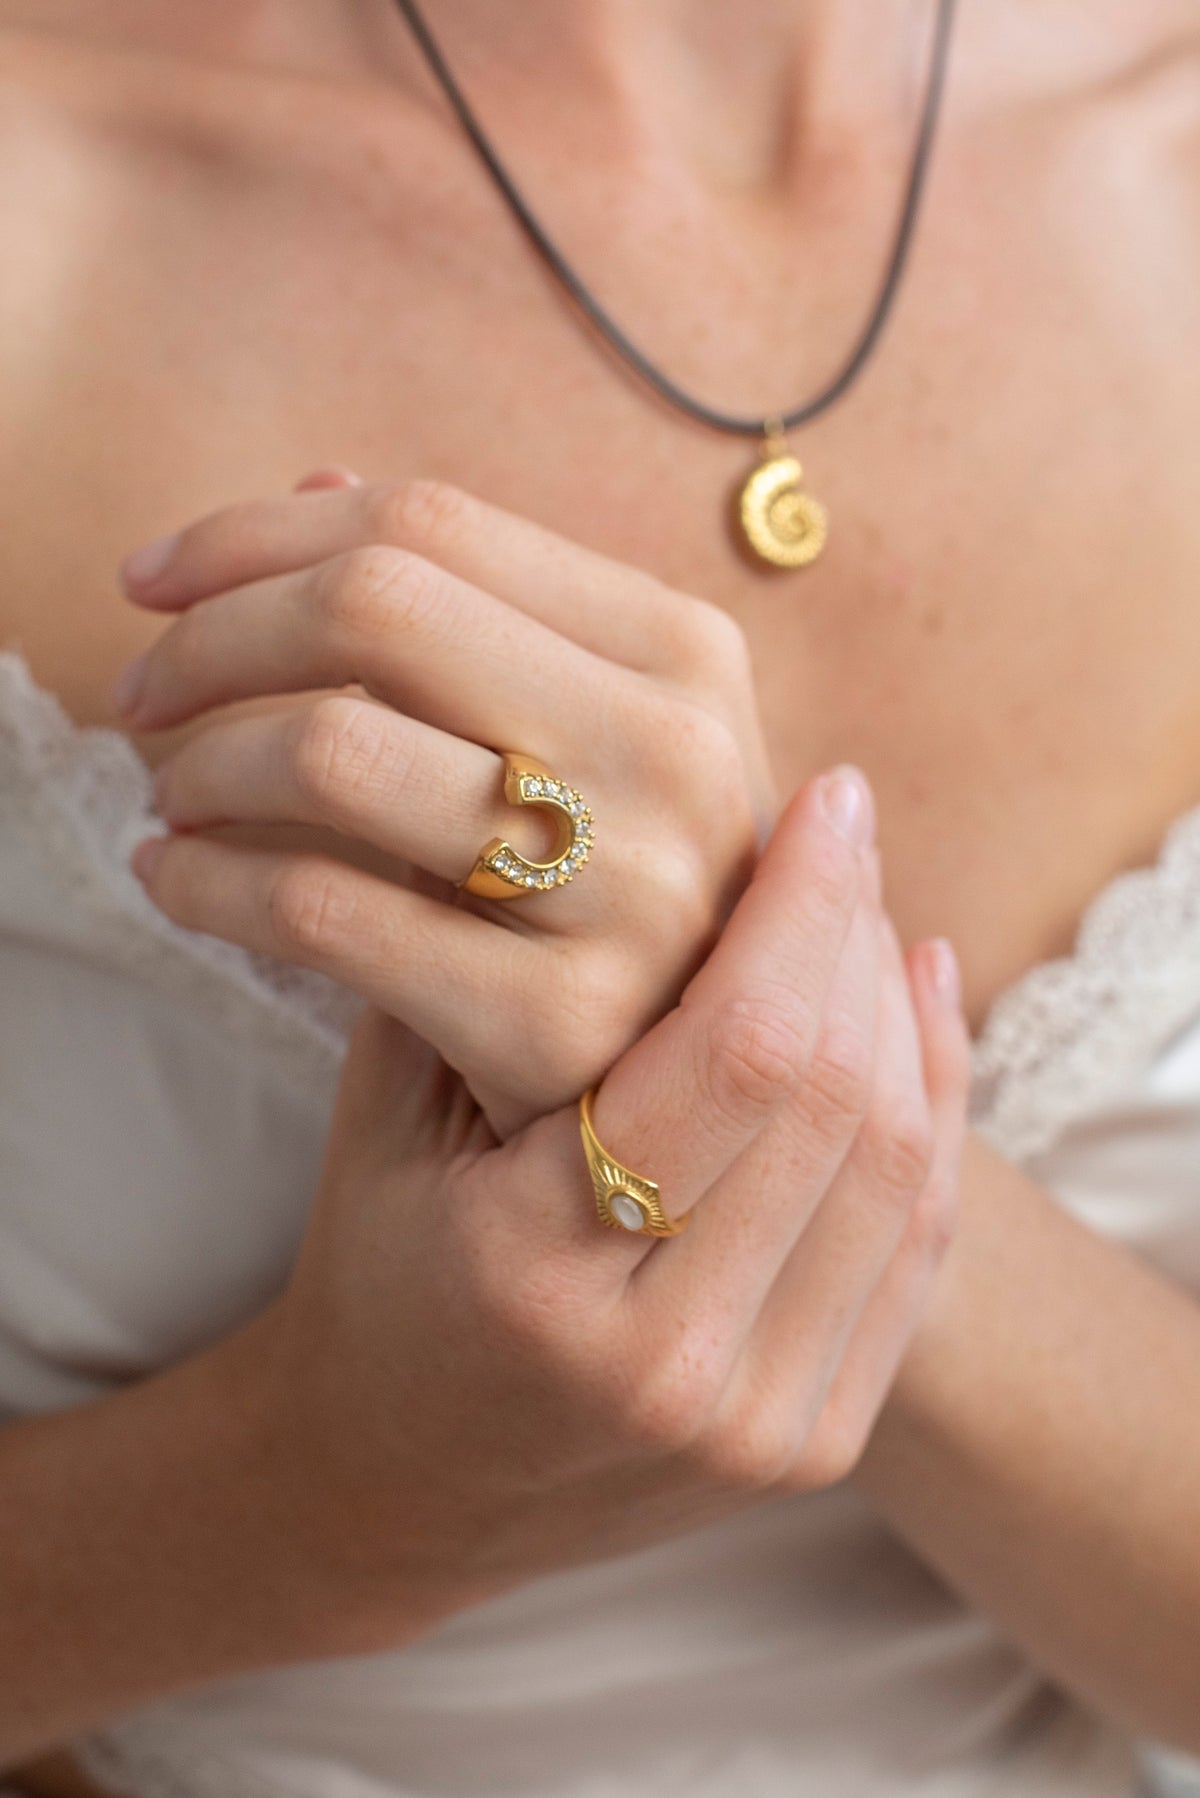 Adjustable Crystal Swirl Rings – The Lucky Libra